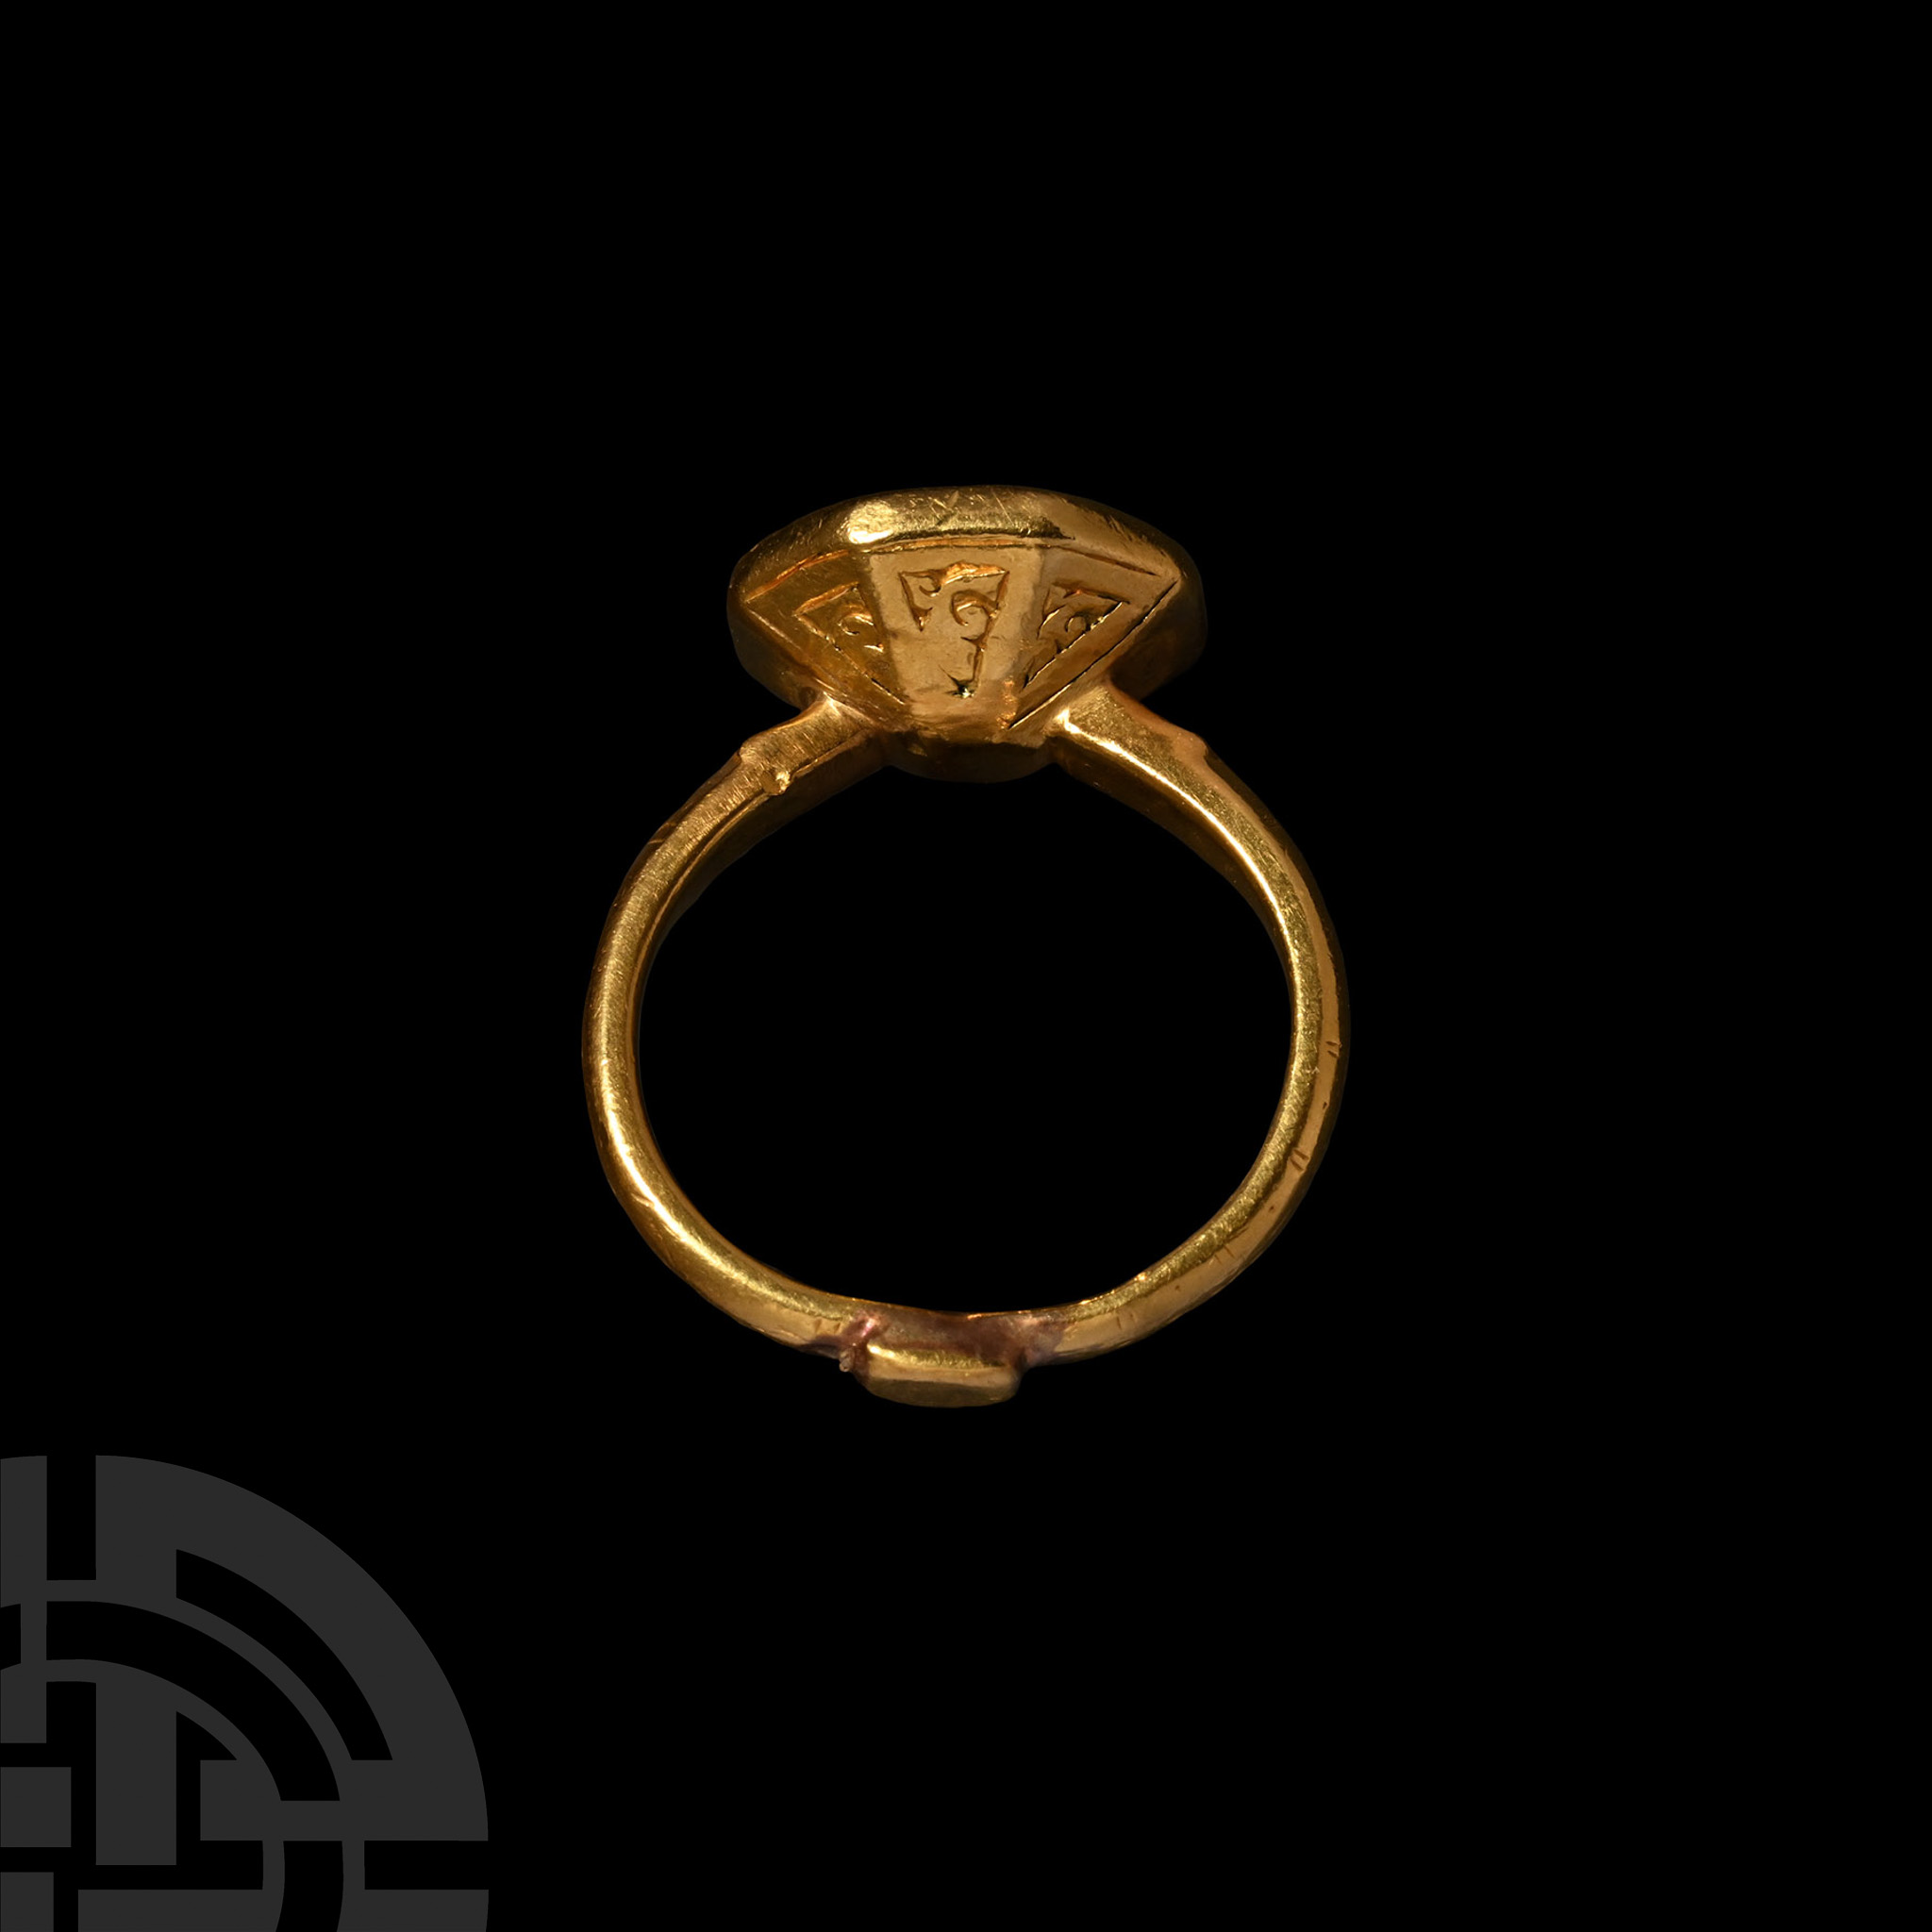 Medieval Gold Signet Ring with Hexagonal Bezel Engraved with an Arabic Inscription - Image 2 of 2